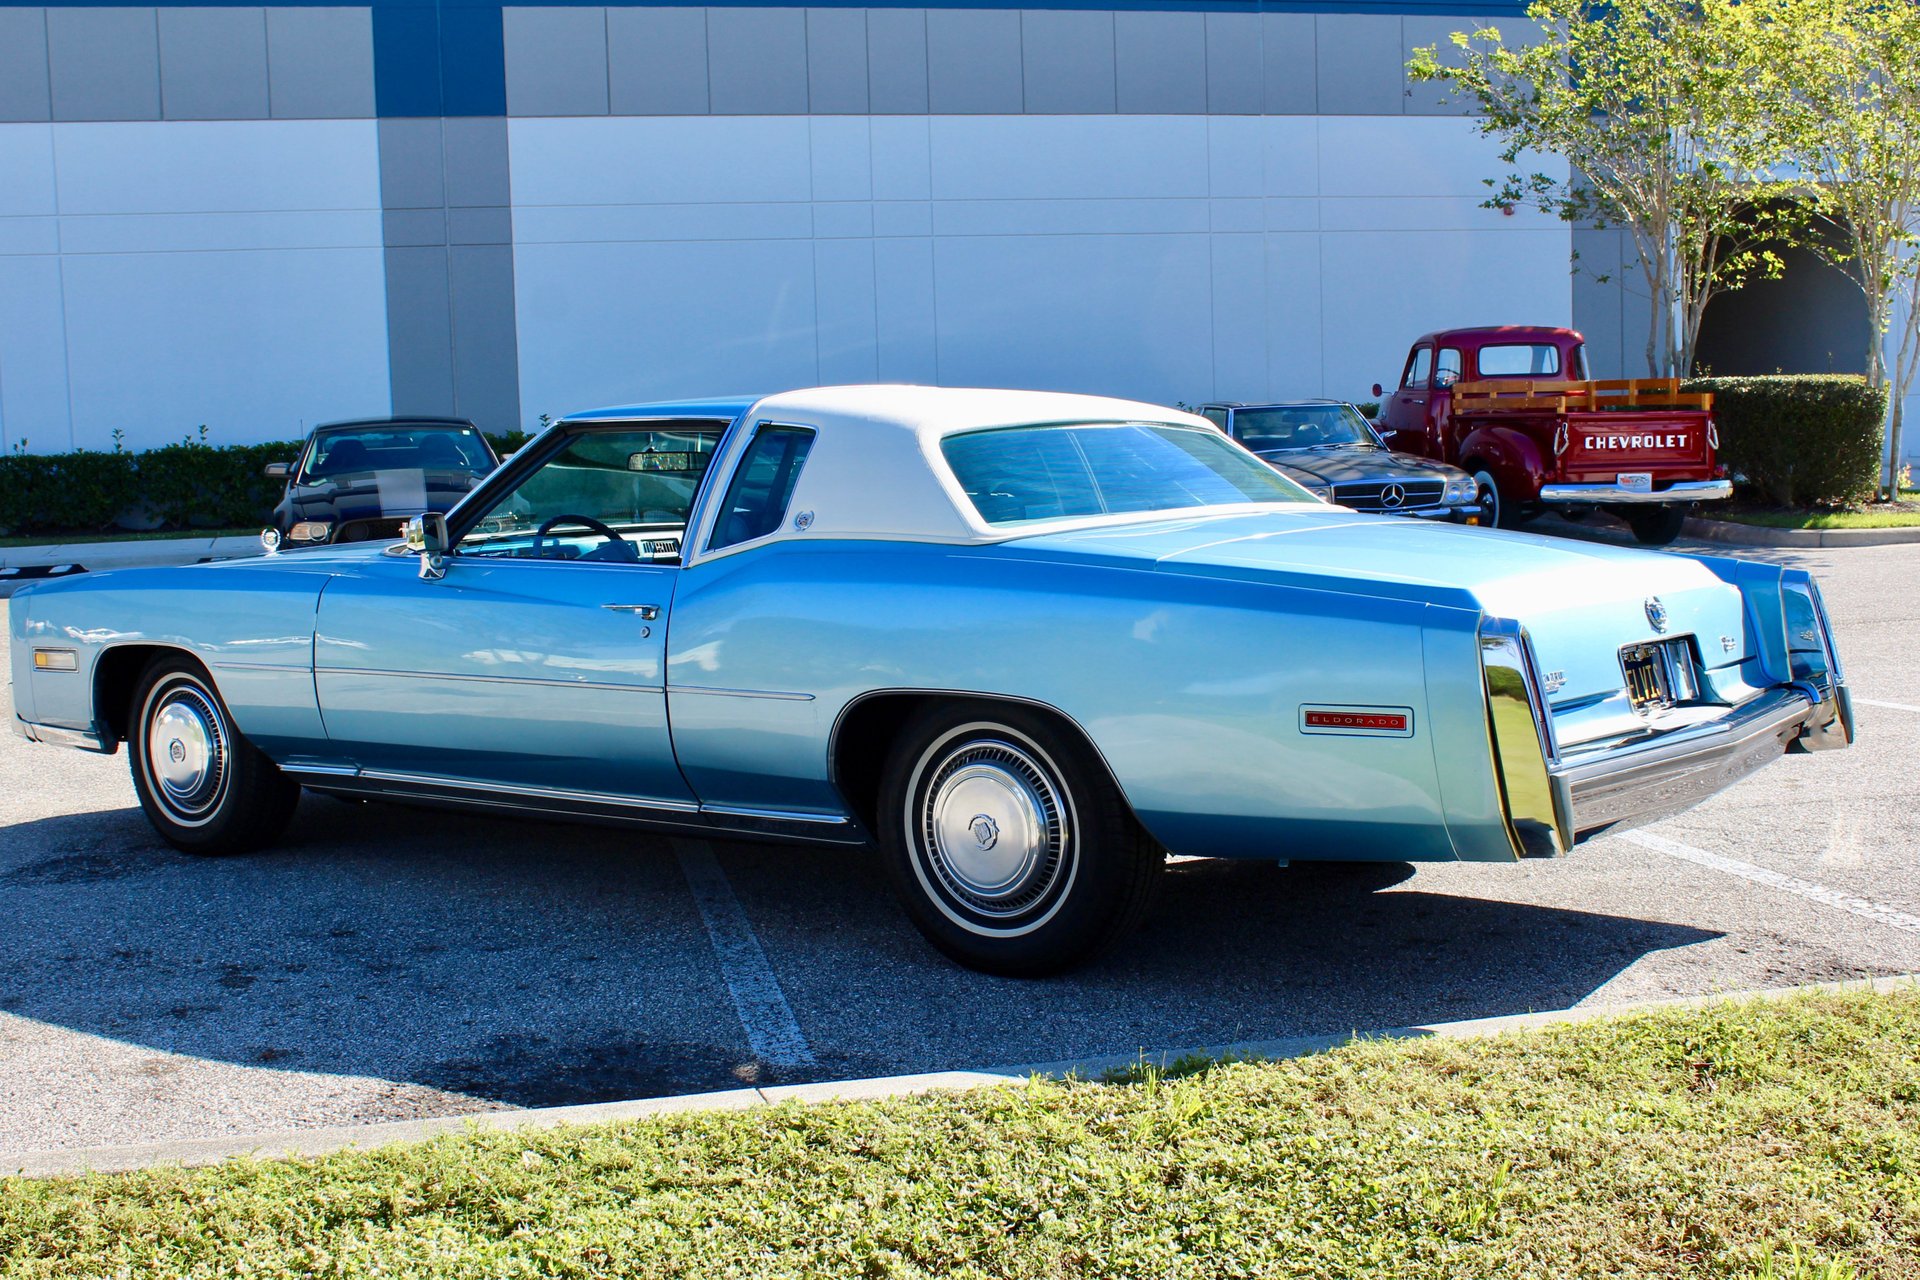 For Sale 1977 Cadillac 